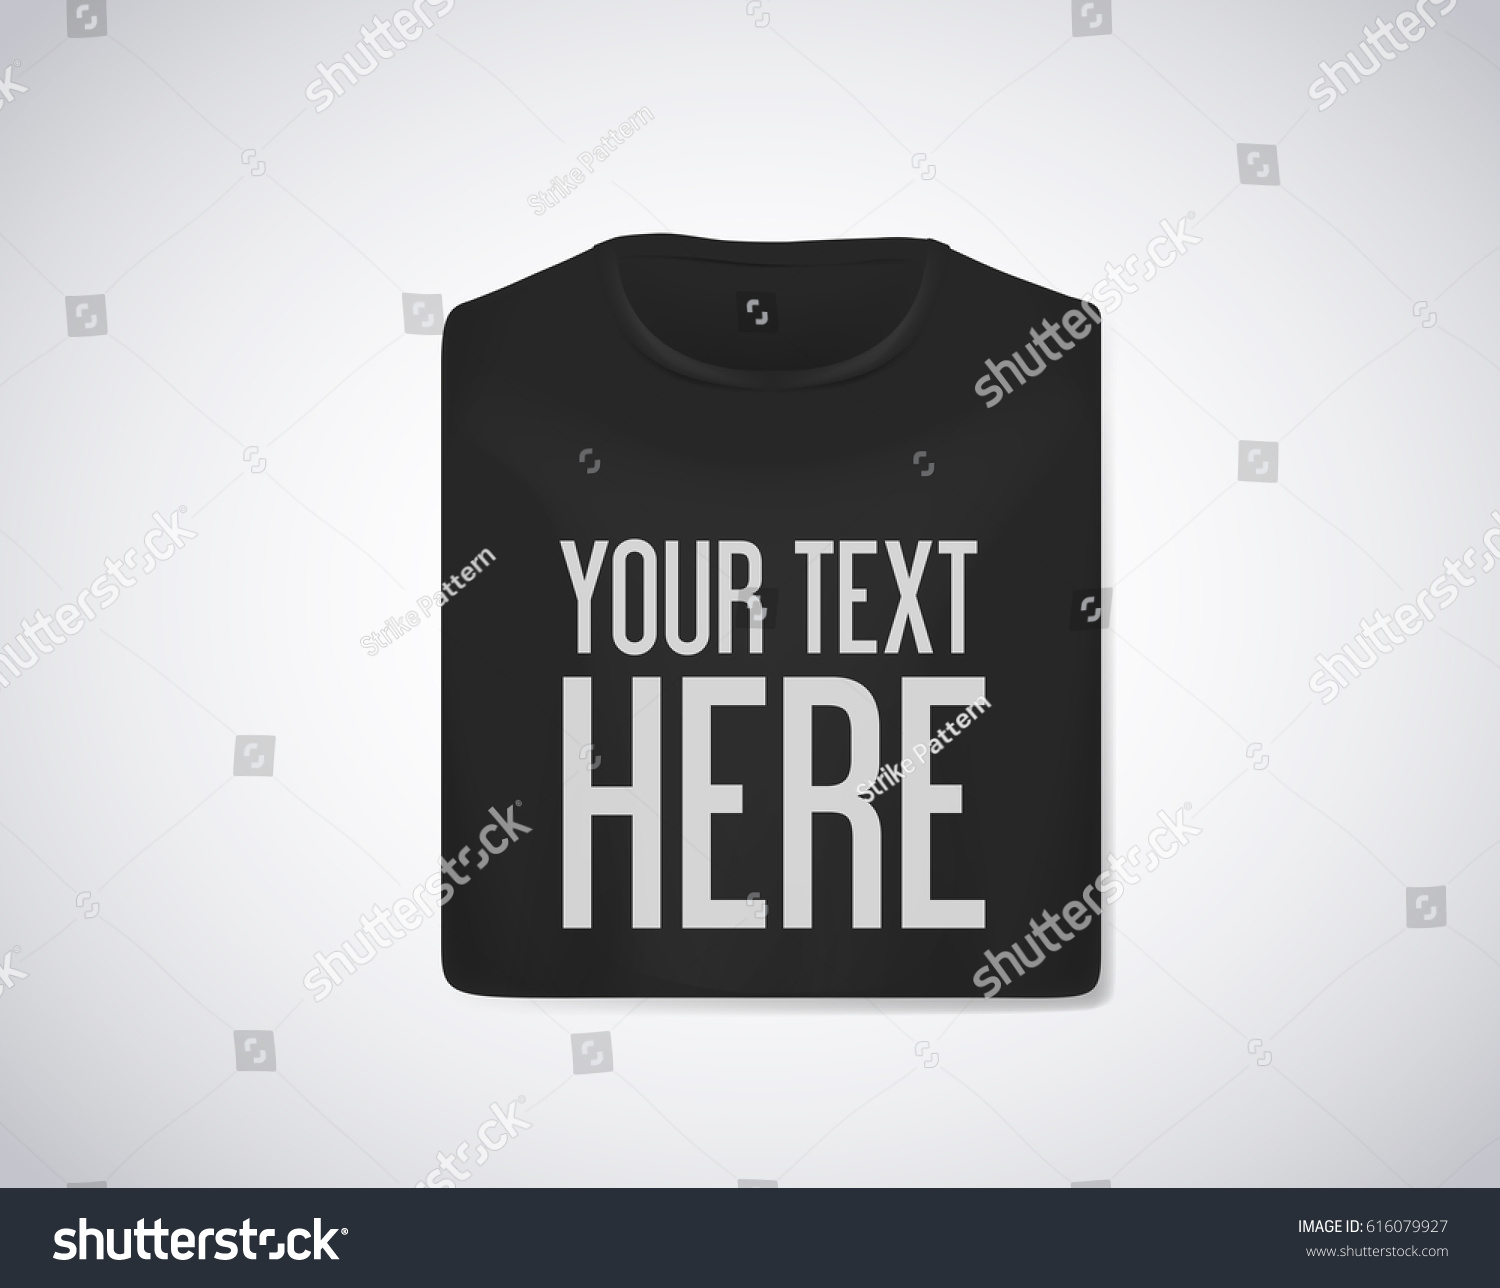 Download 35+ Black Folded Shirt Mockup Gif Yellowimages - Free PSD ...